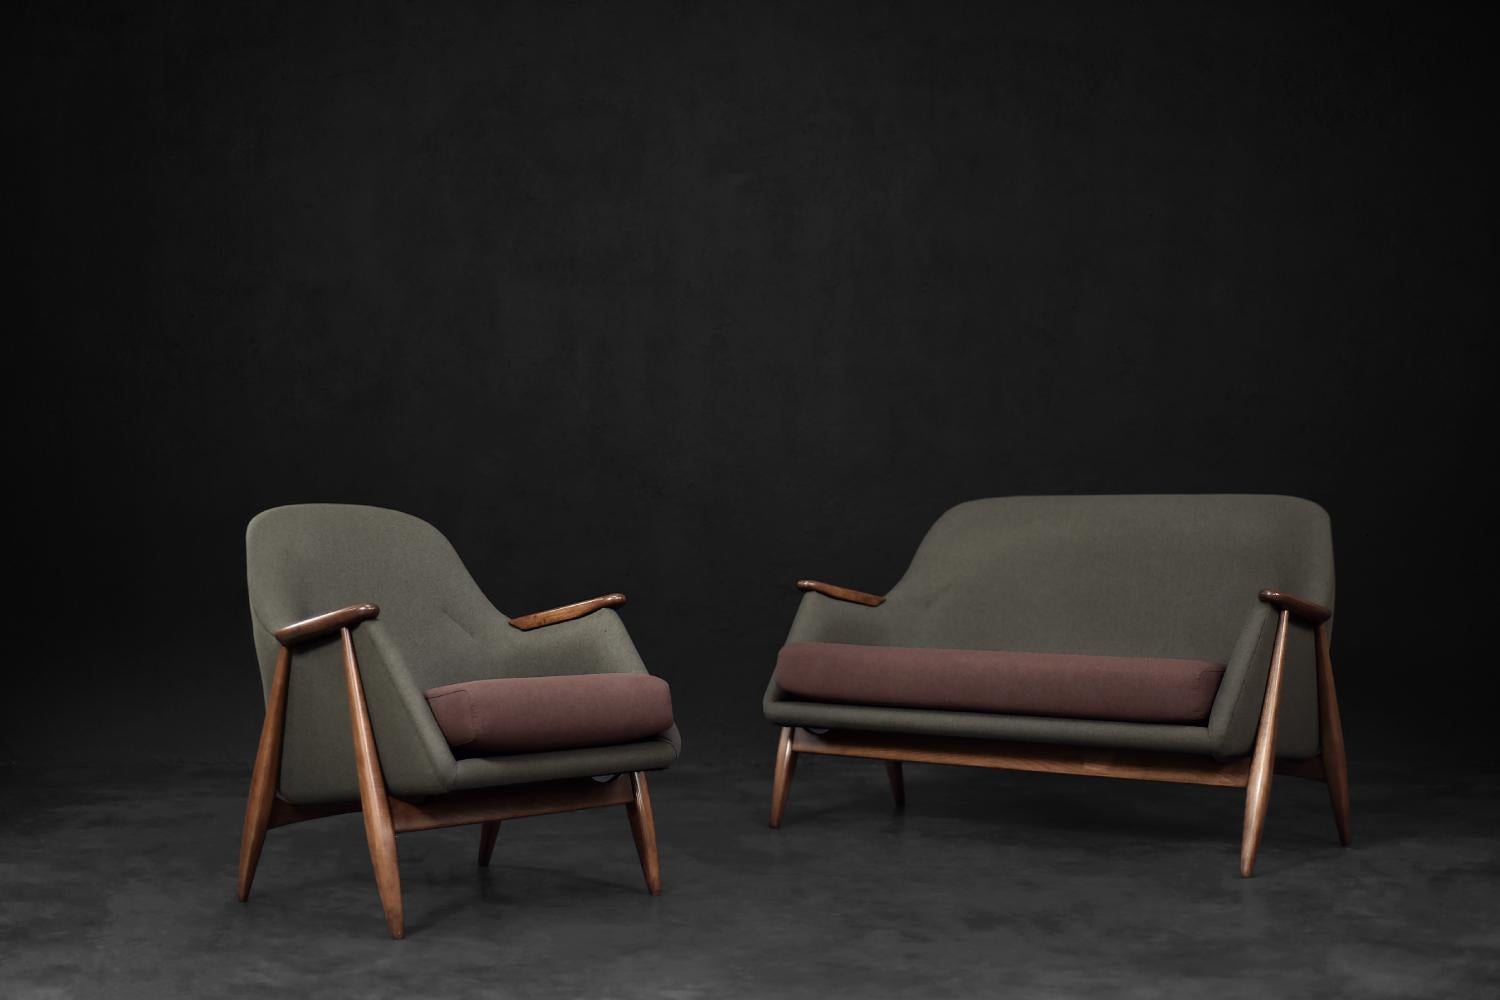 This spectacular Pallas lounge set was designed by the Swedish designer Svante Skogh in 1954 and is a rare example from the repertoire of modernist design. The Pallas set was designed for the Finnish manufacturer Asko and consists of a two-seater